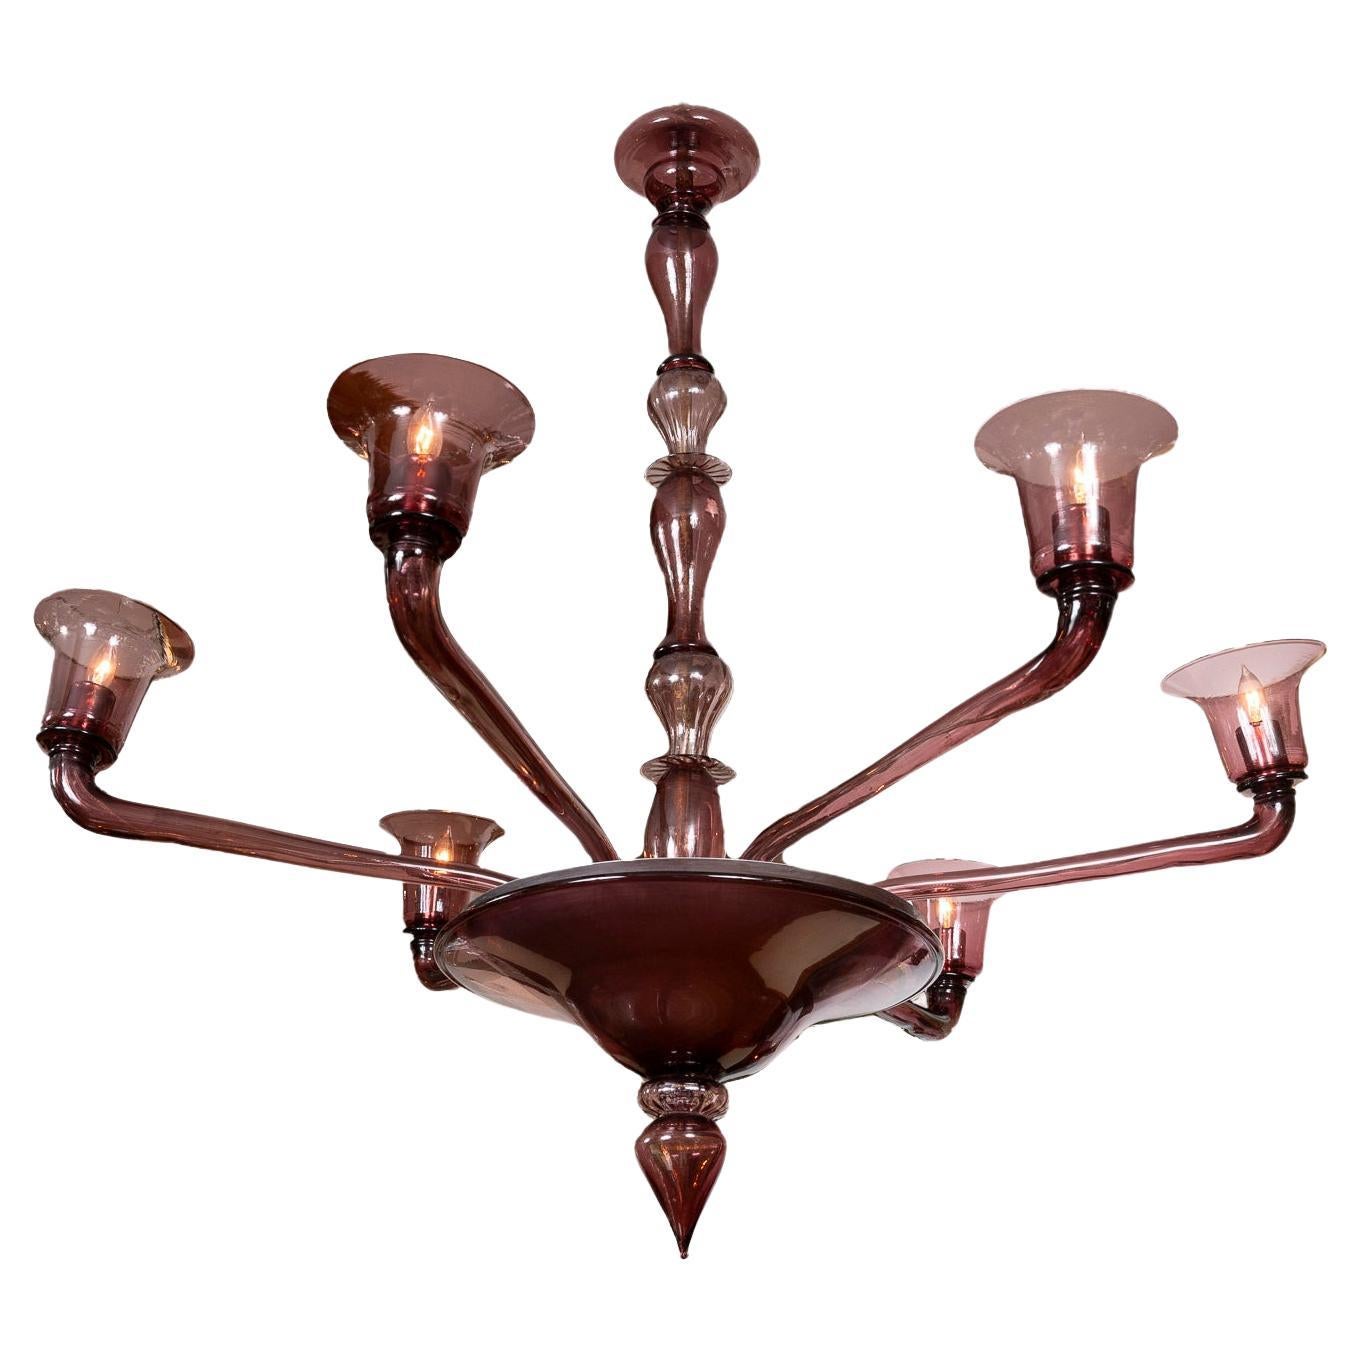 A rare and large Veronese Six Arm Up-light Chandelier blown in a beautiful shade of plum. This sleek and timeless fixture with a center shaft comprised of six separate pieces of shades of plum displays six outreaching straight arms upholding deep